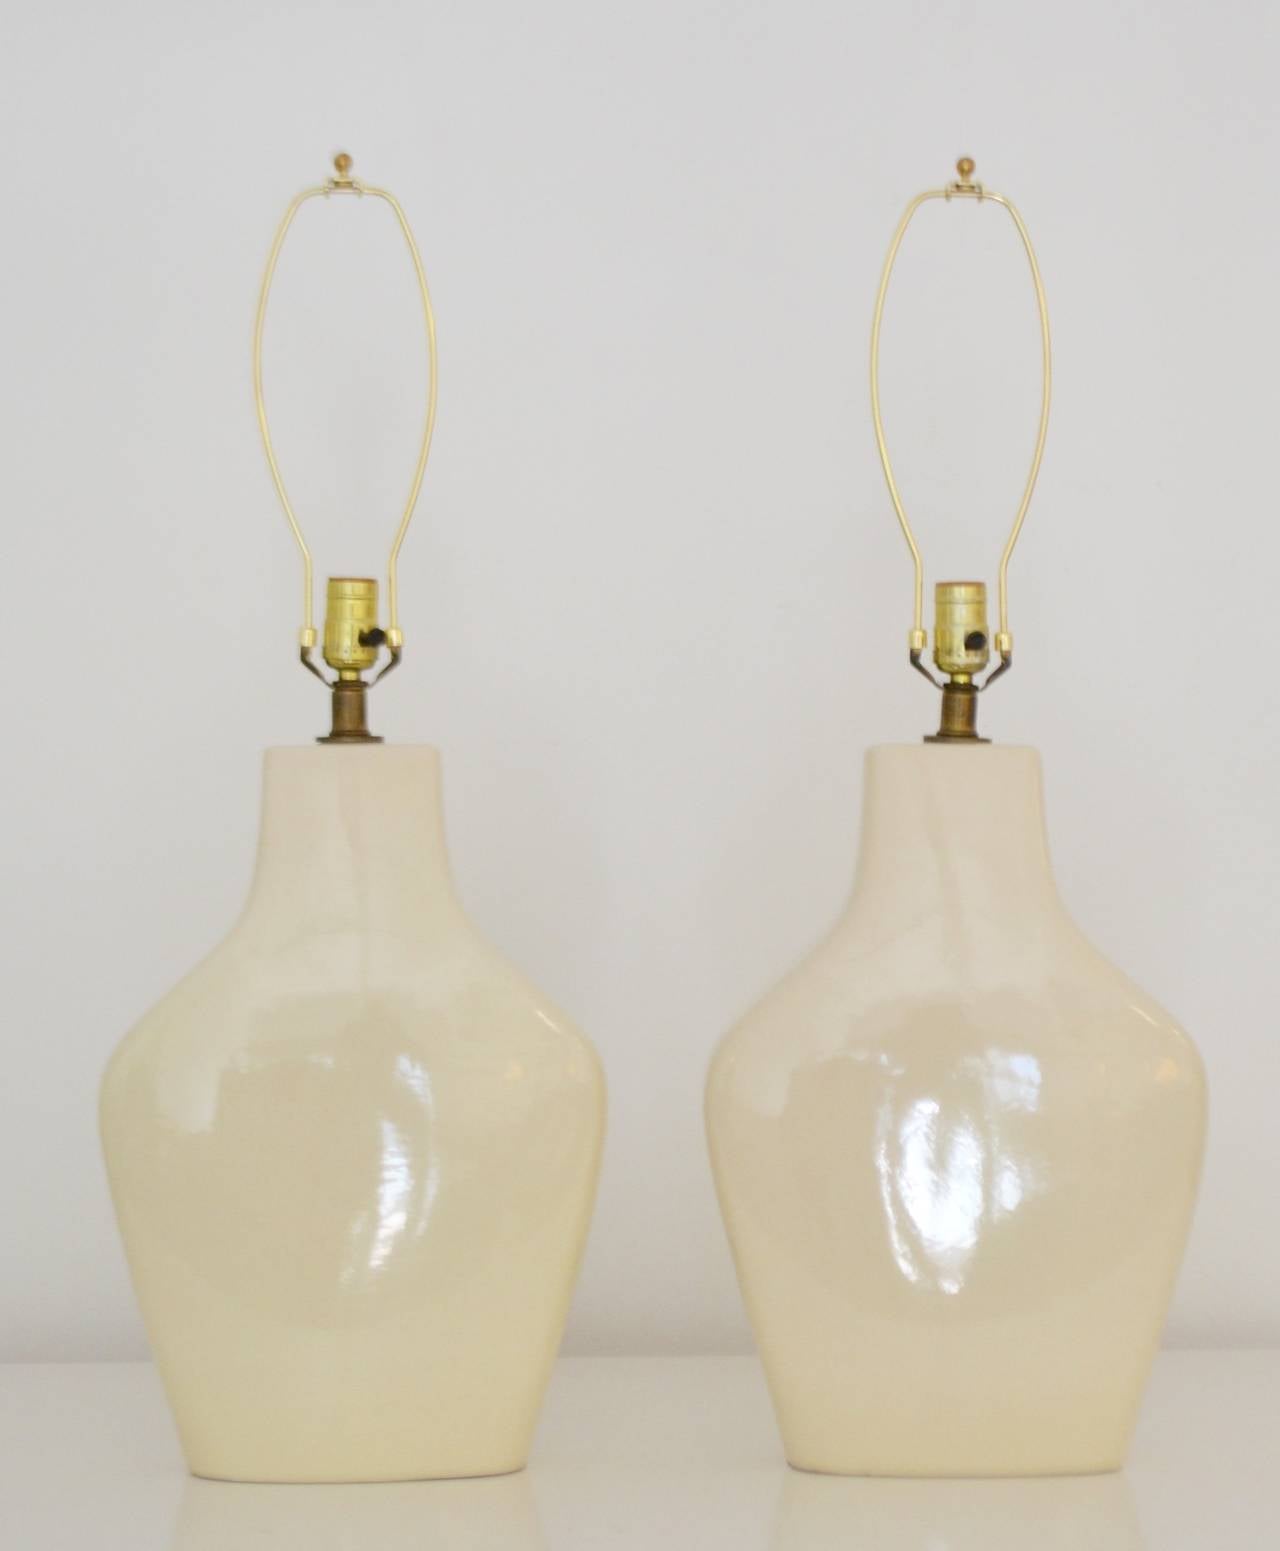 Glazed Pair of Mid-Century Modern Ceramic Table Lamps For Sale